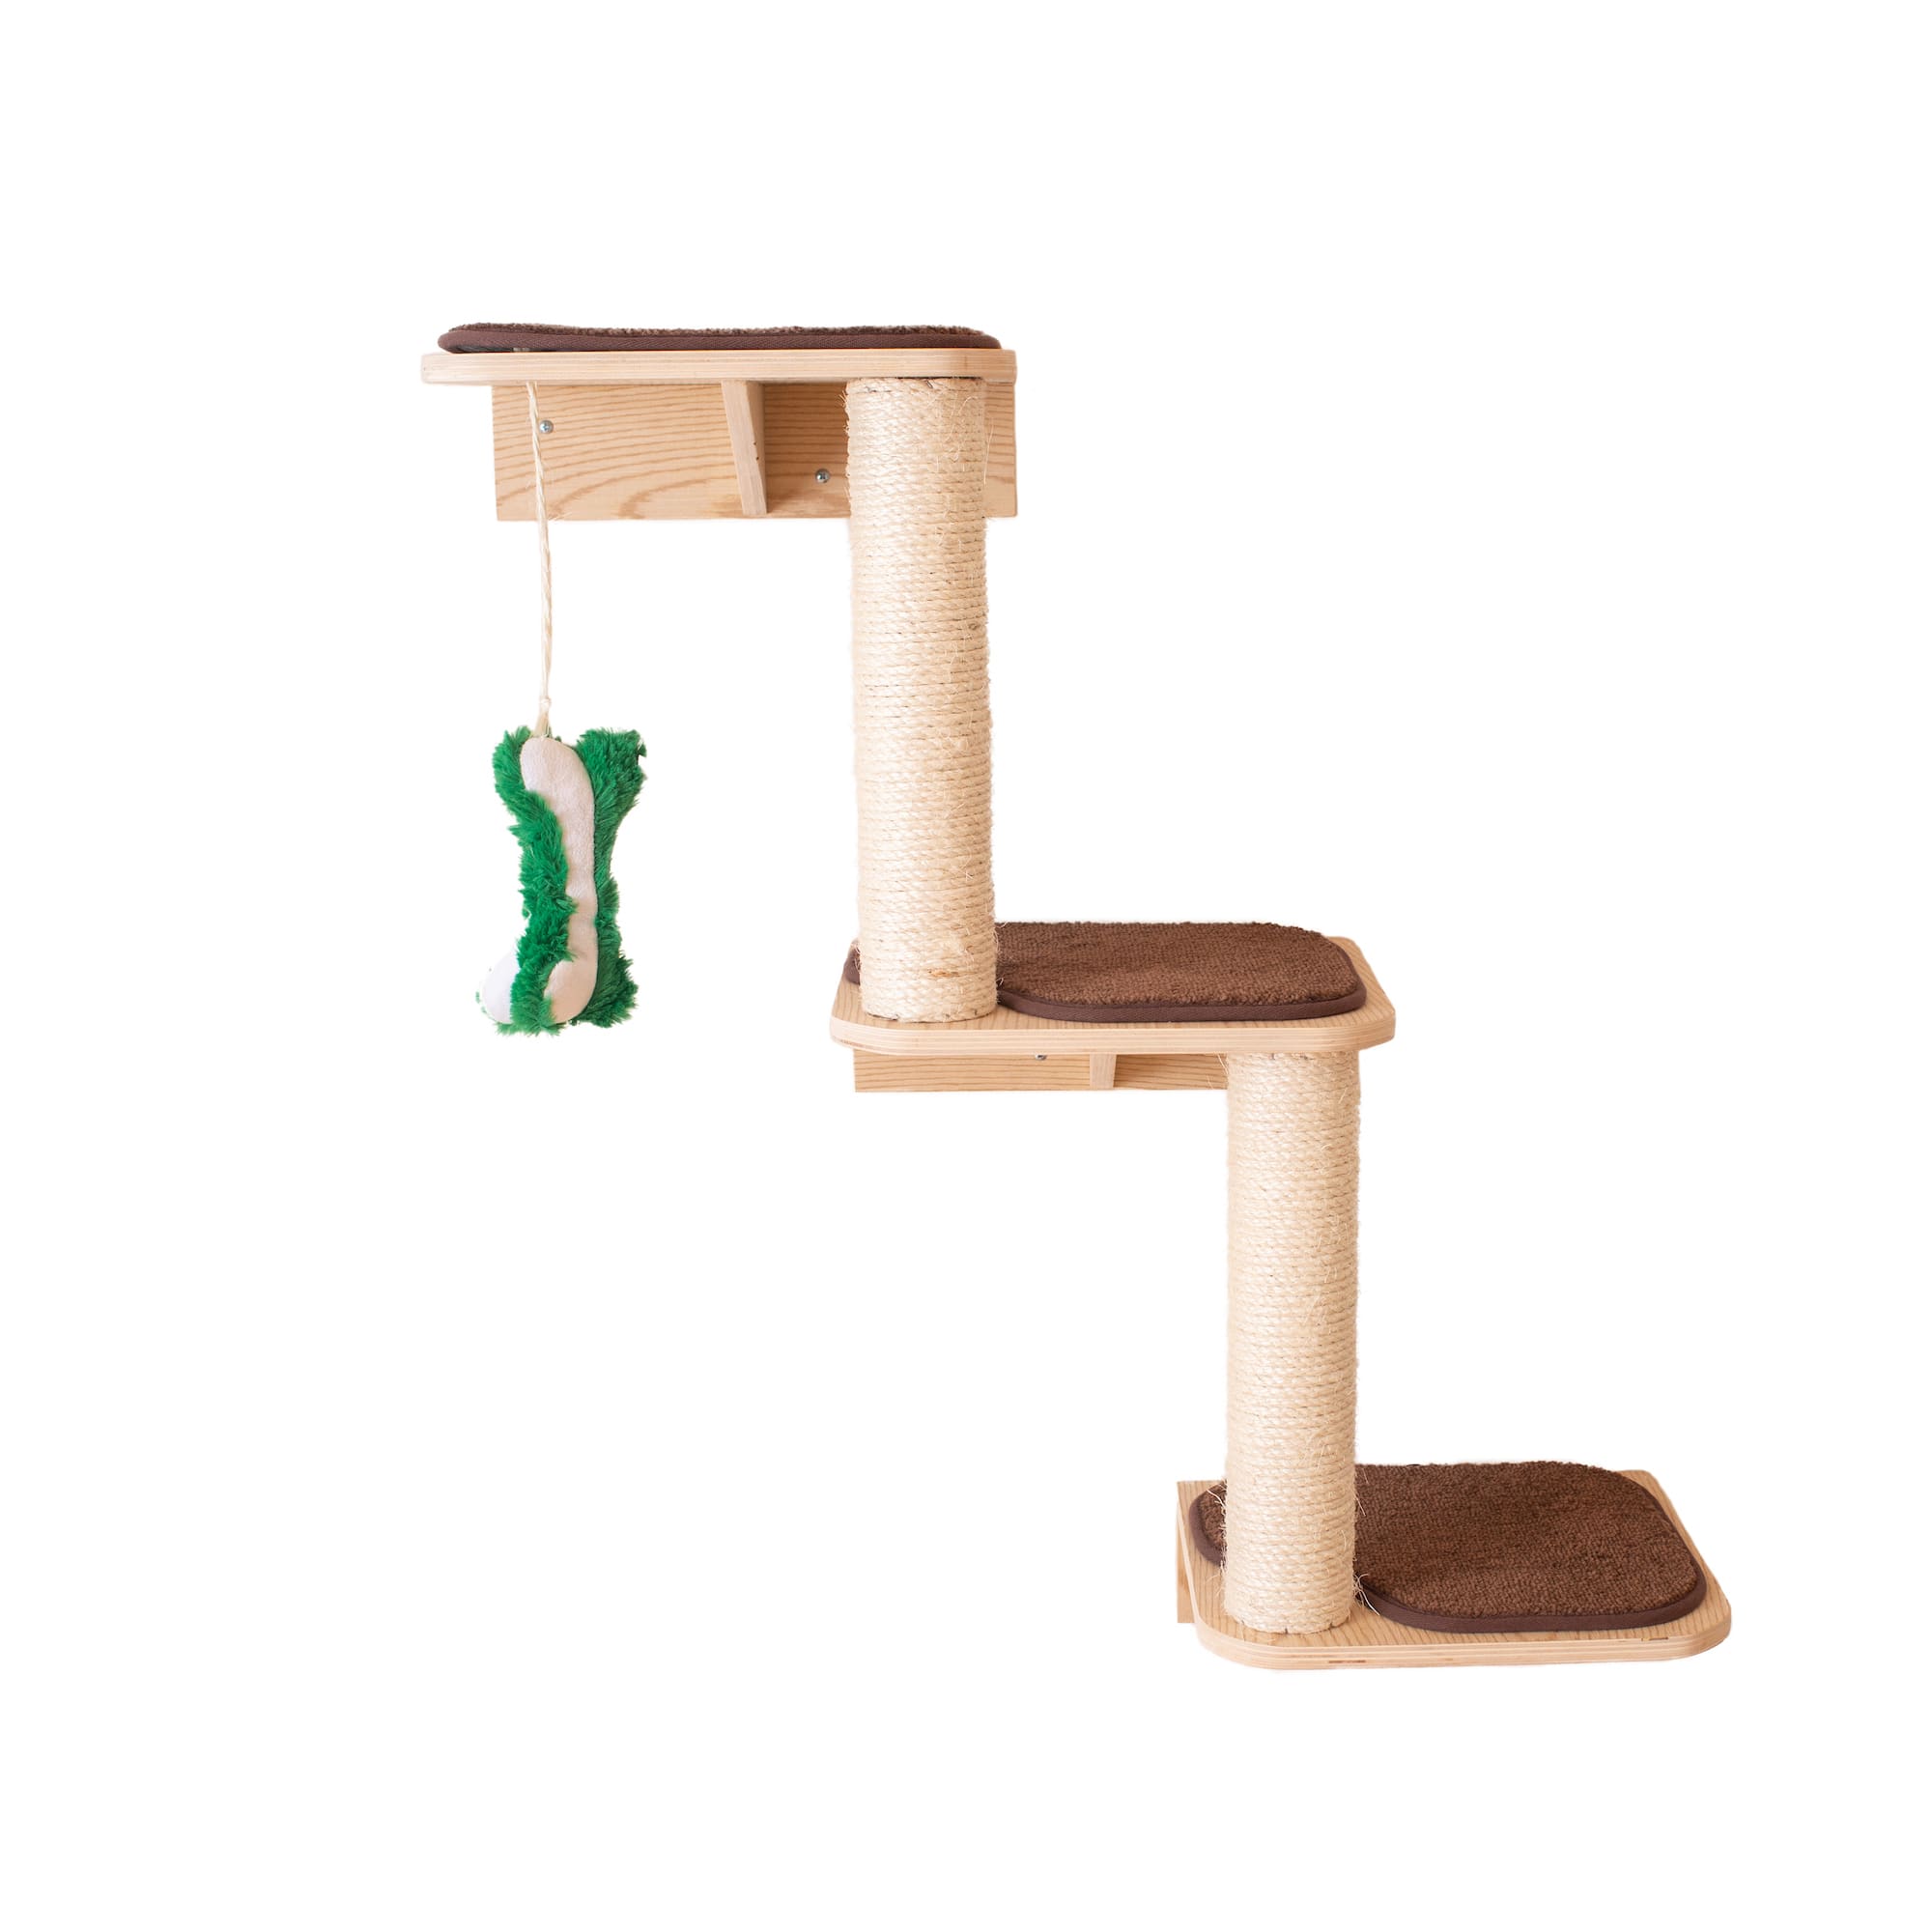 Photos - Other for Cats Armarkat Real Wood Model W1907C Cat Wall Climber, 41" H, Medium, 